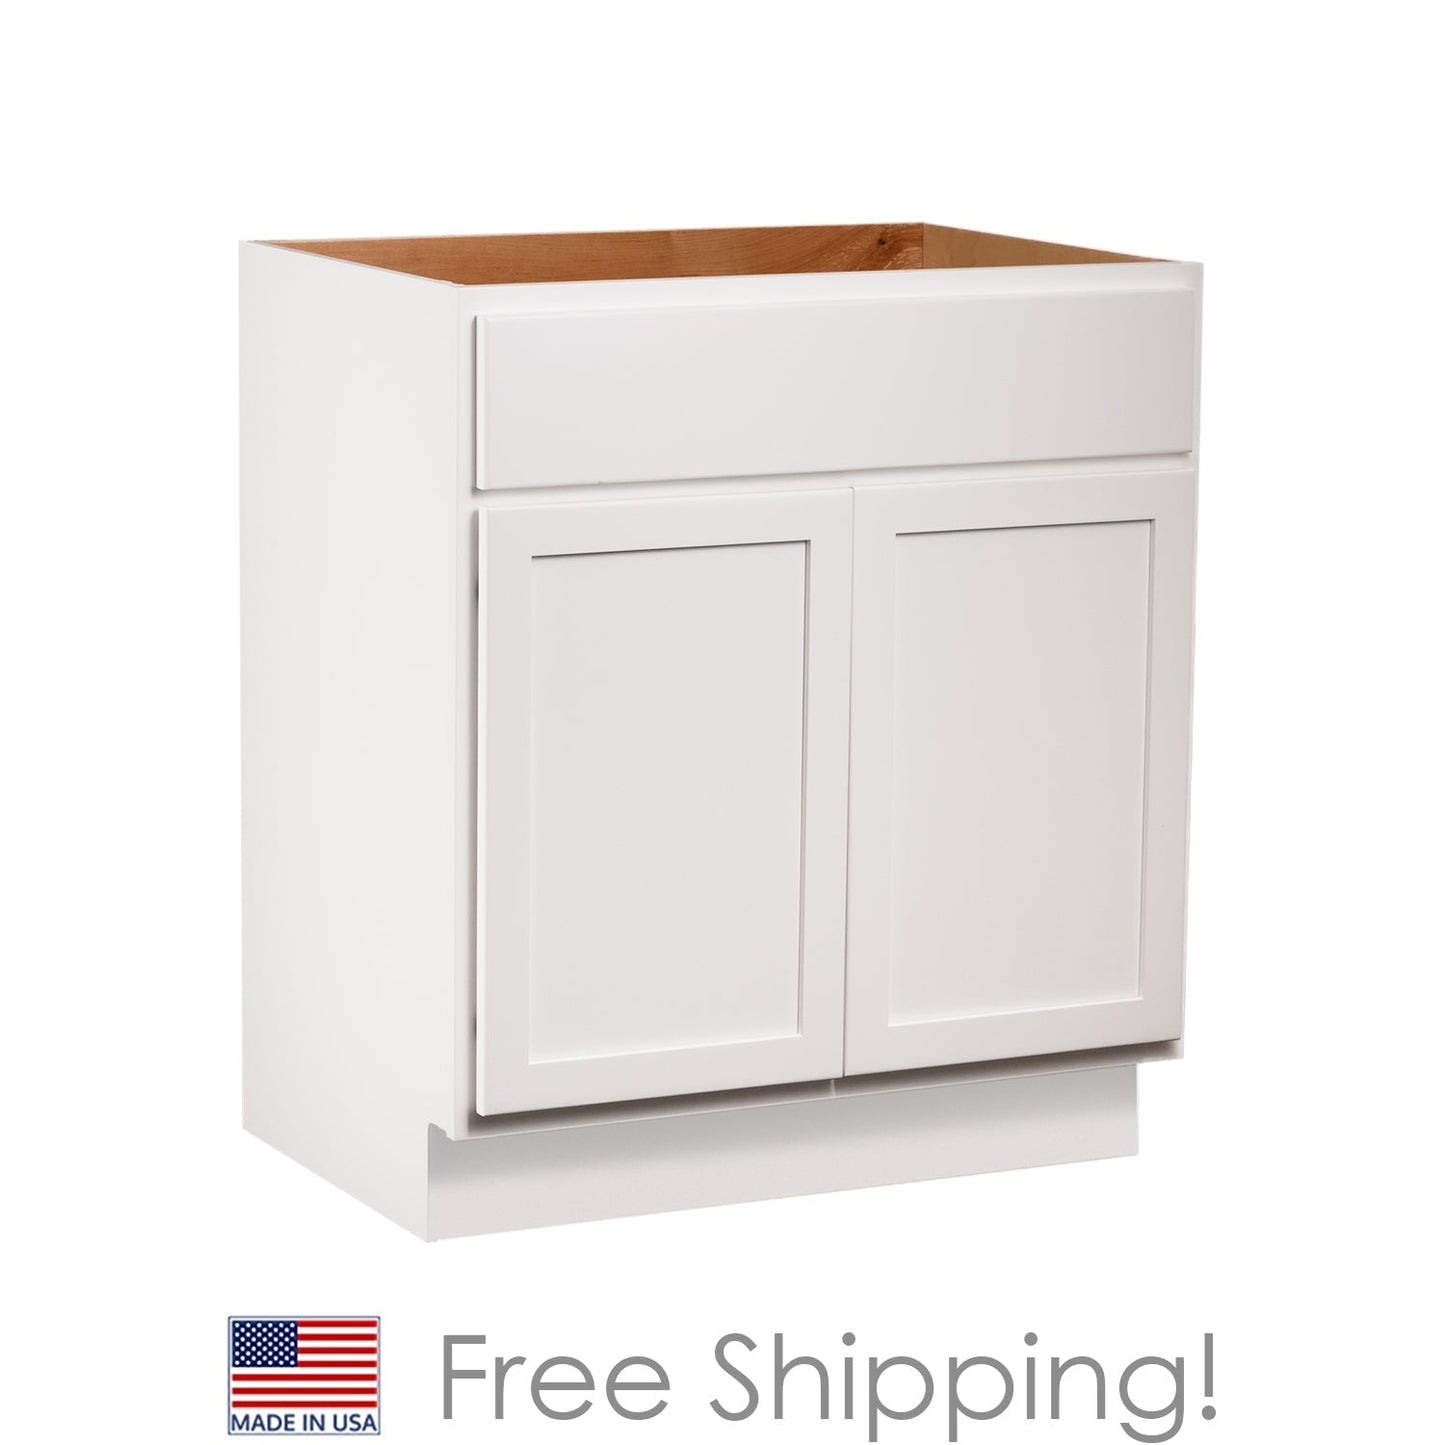 Quicklock RTA (Ready-to-Assemble) Pure White Vanity Base Cabinet | 36"Wx34.5"Hx21"D